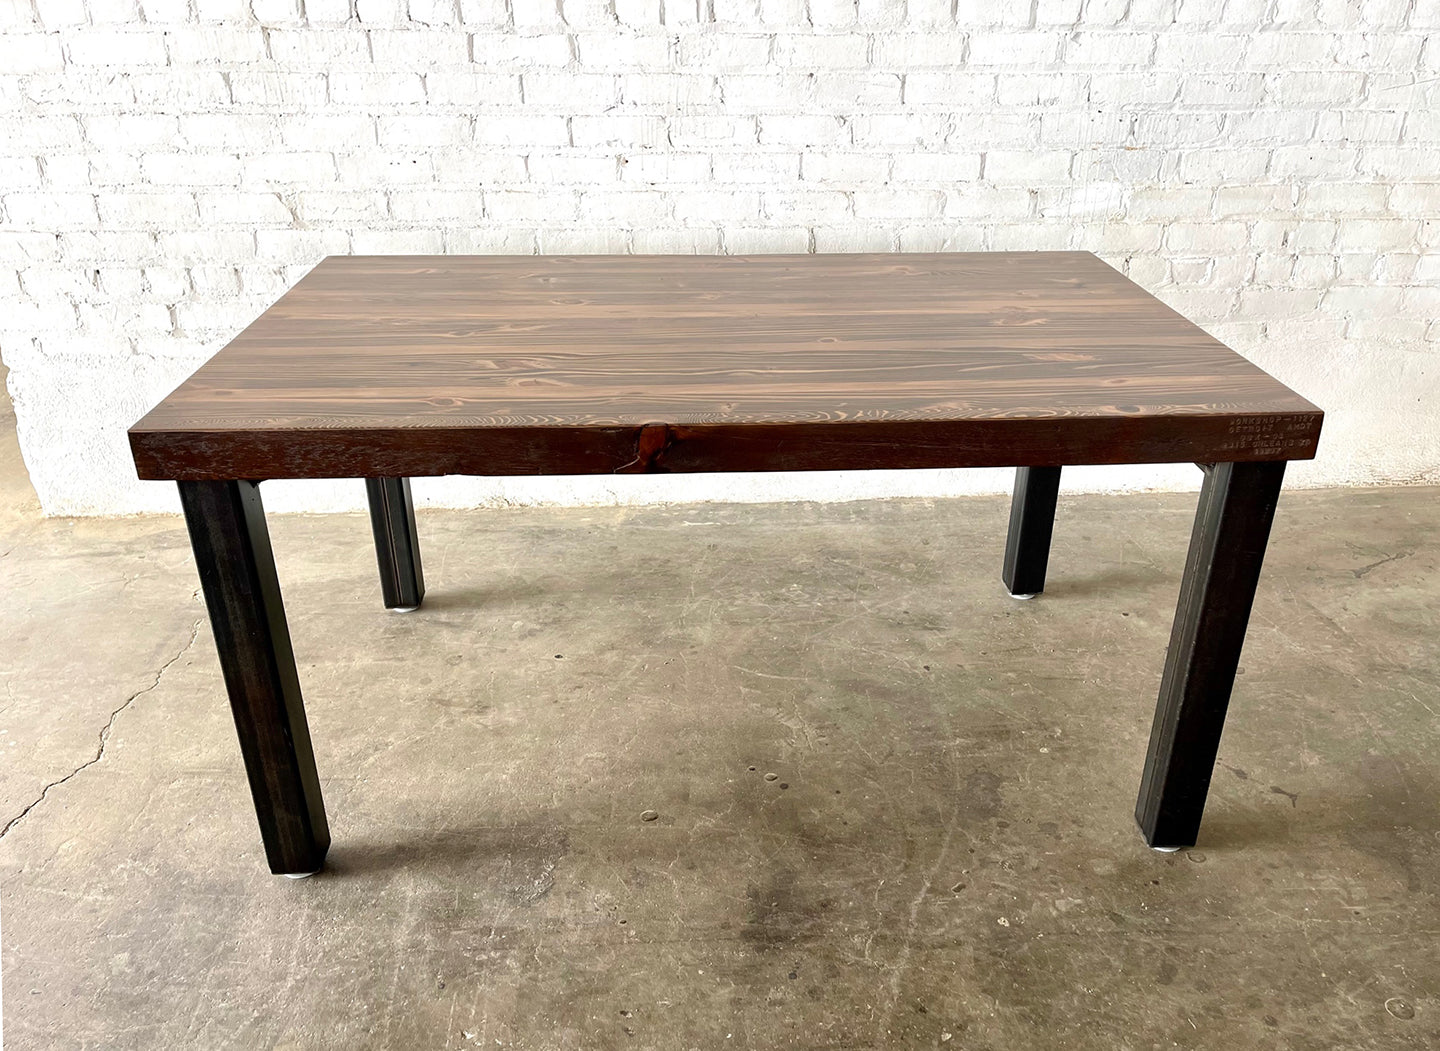 High Street Dining Table - Walnut Stain Finish